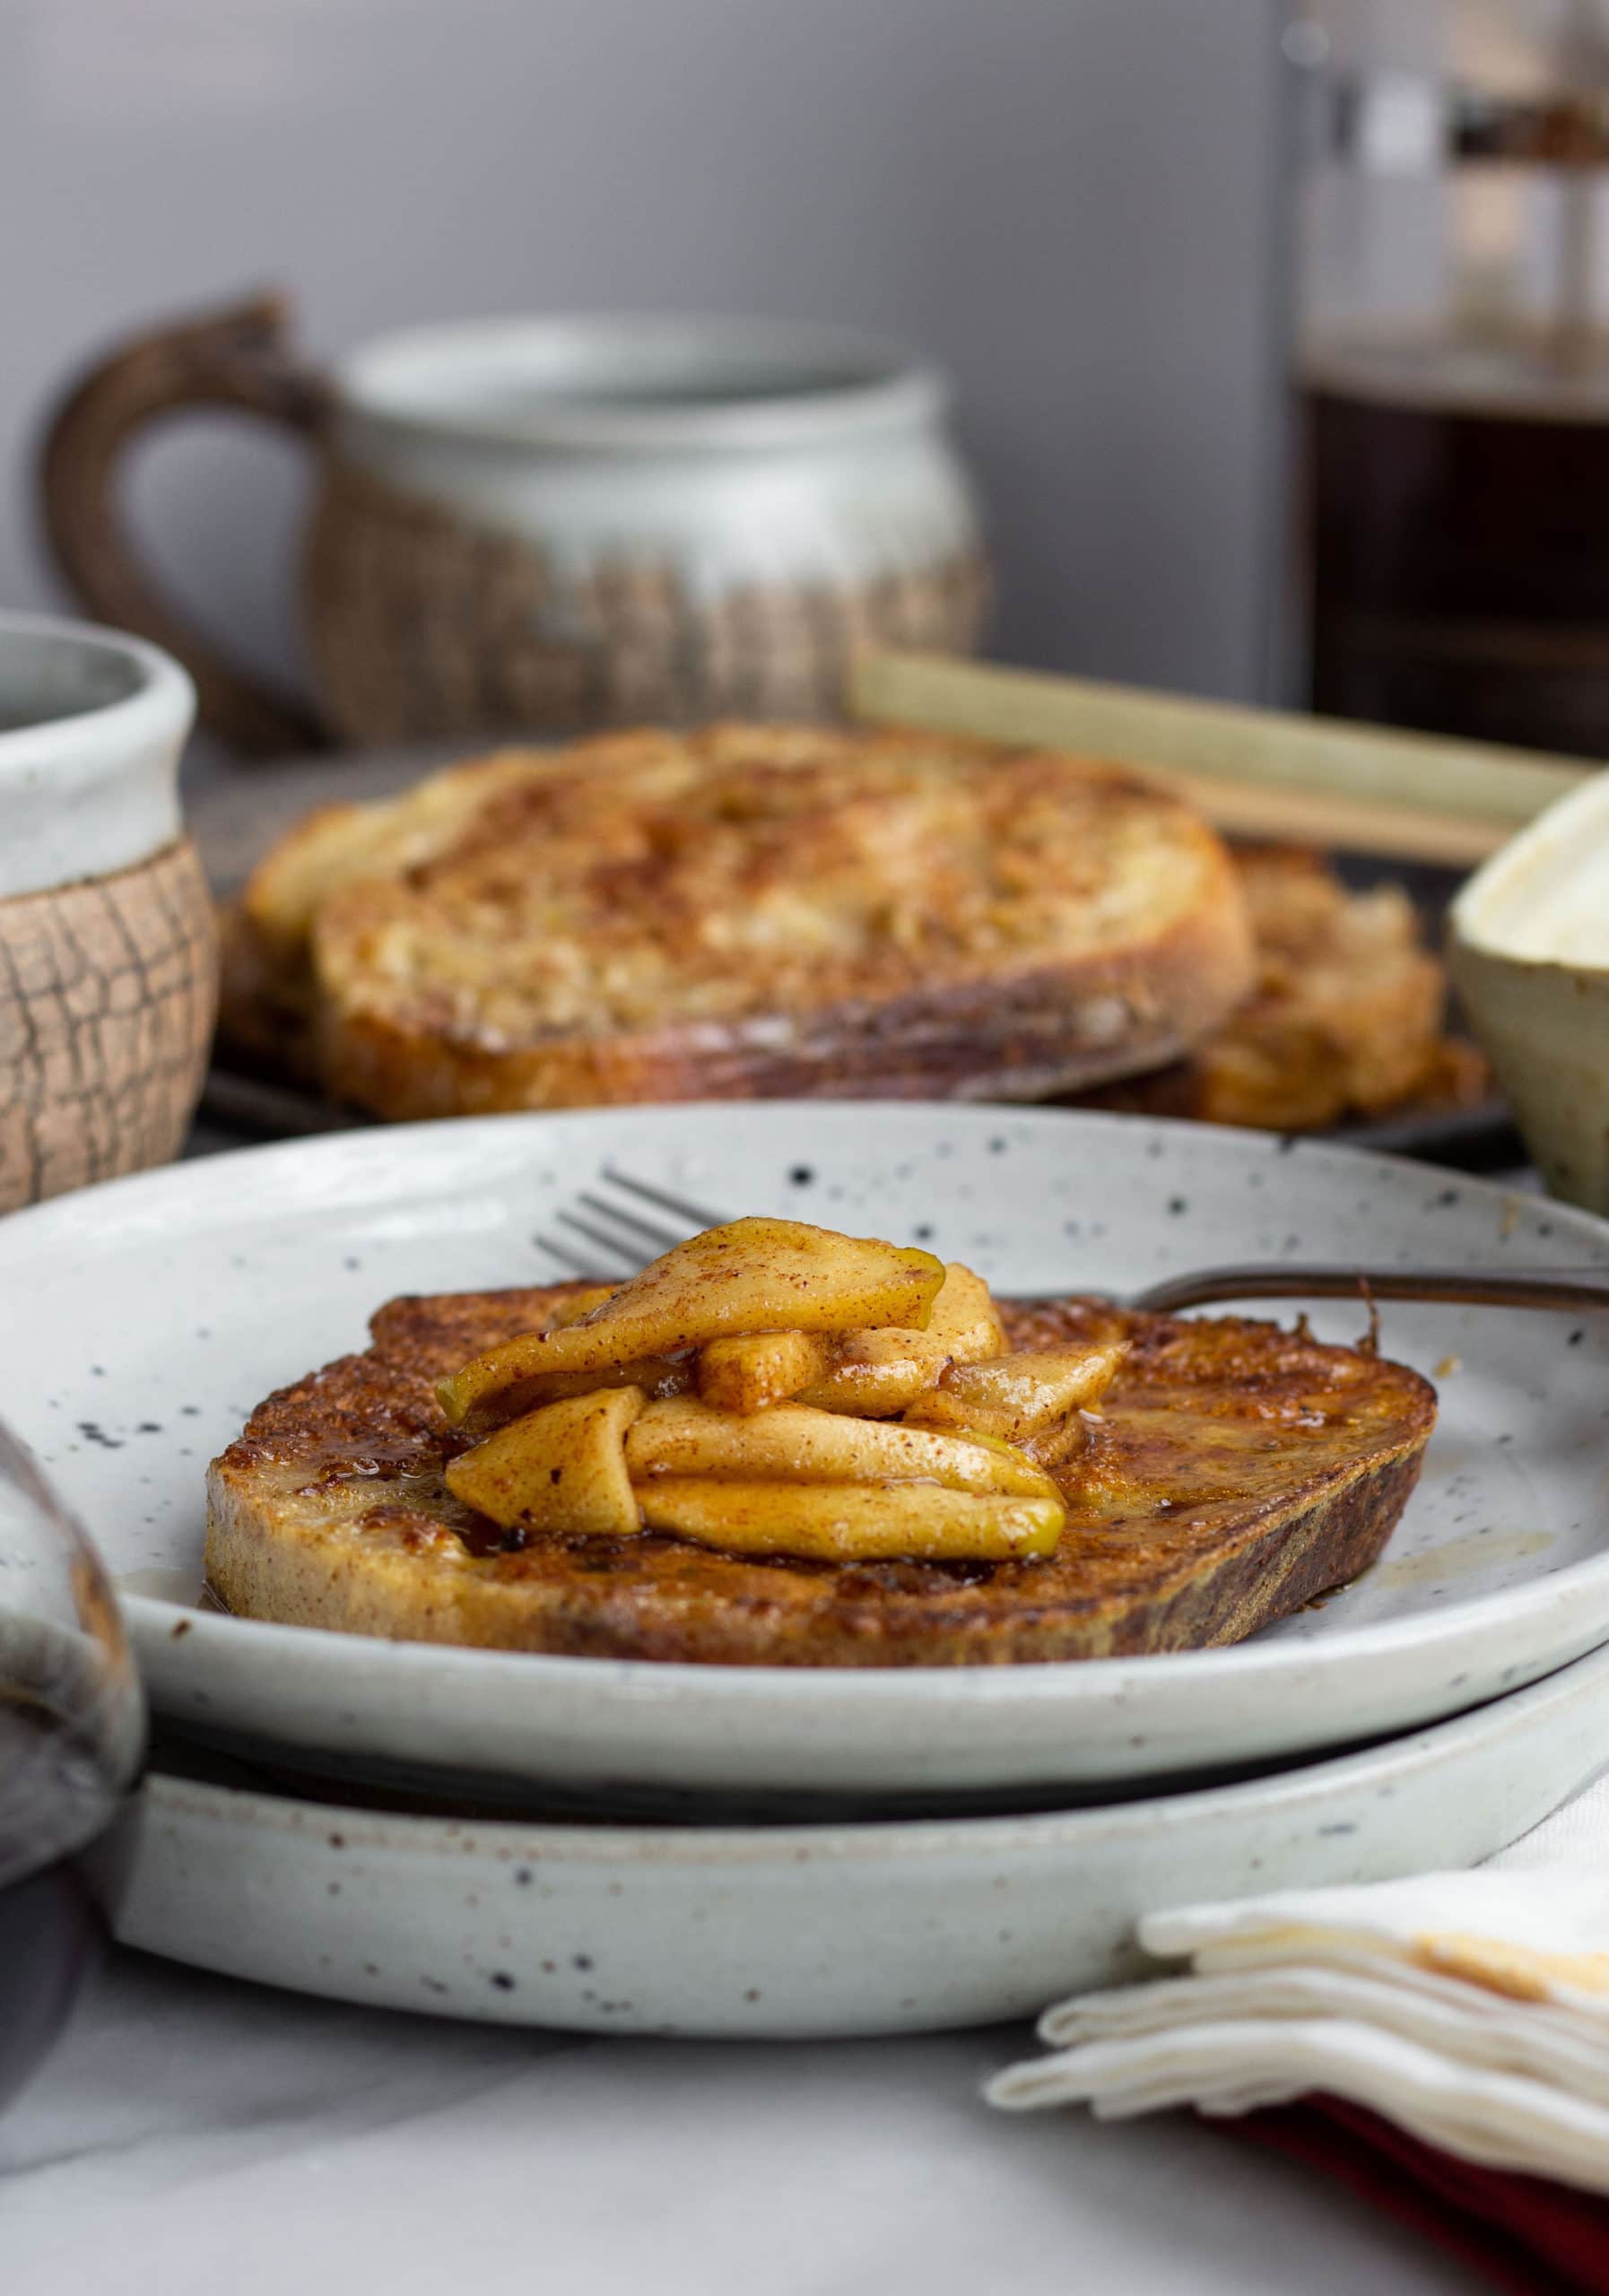 https://sohappyyoulikedit.com/wp-content/uploads/2020/10/Sourdough-French-Toast-with-roasted-apples9-scaled.jpg?is-pending-load=1